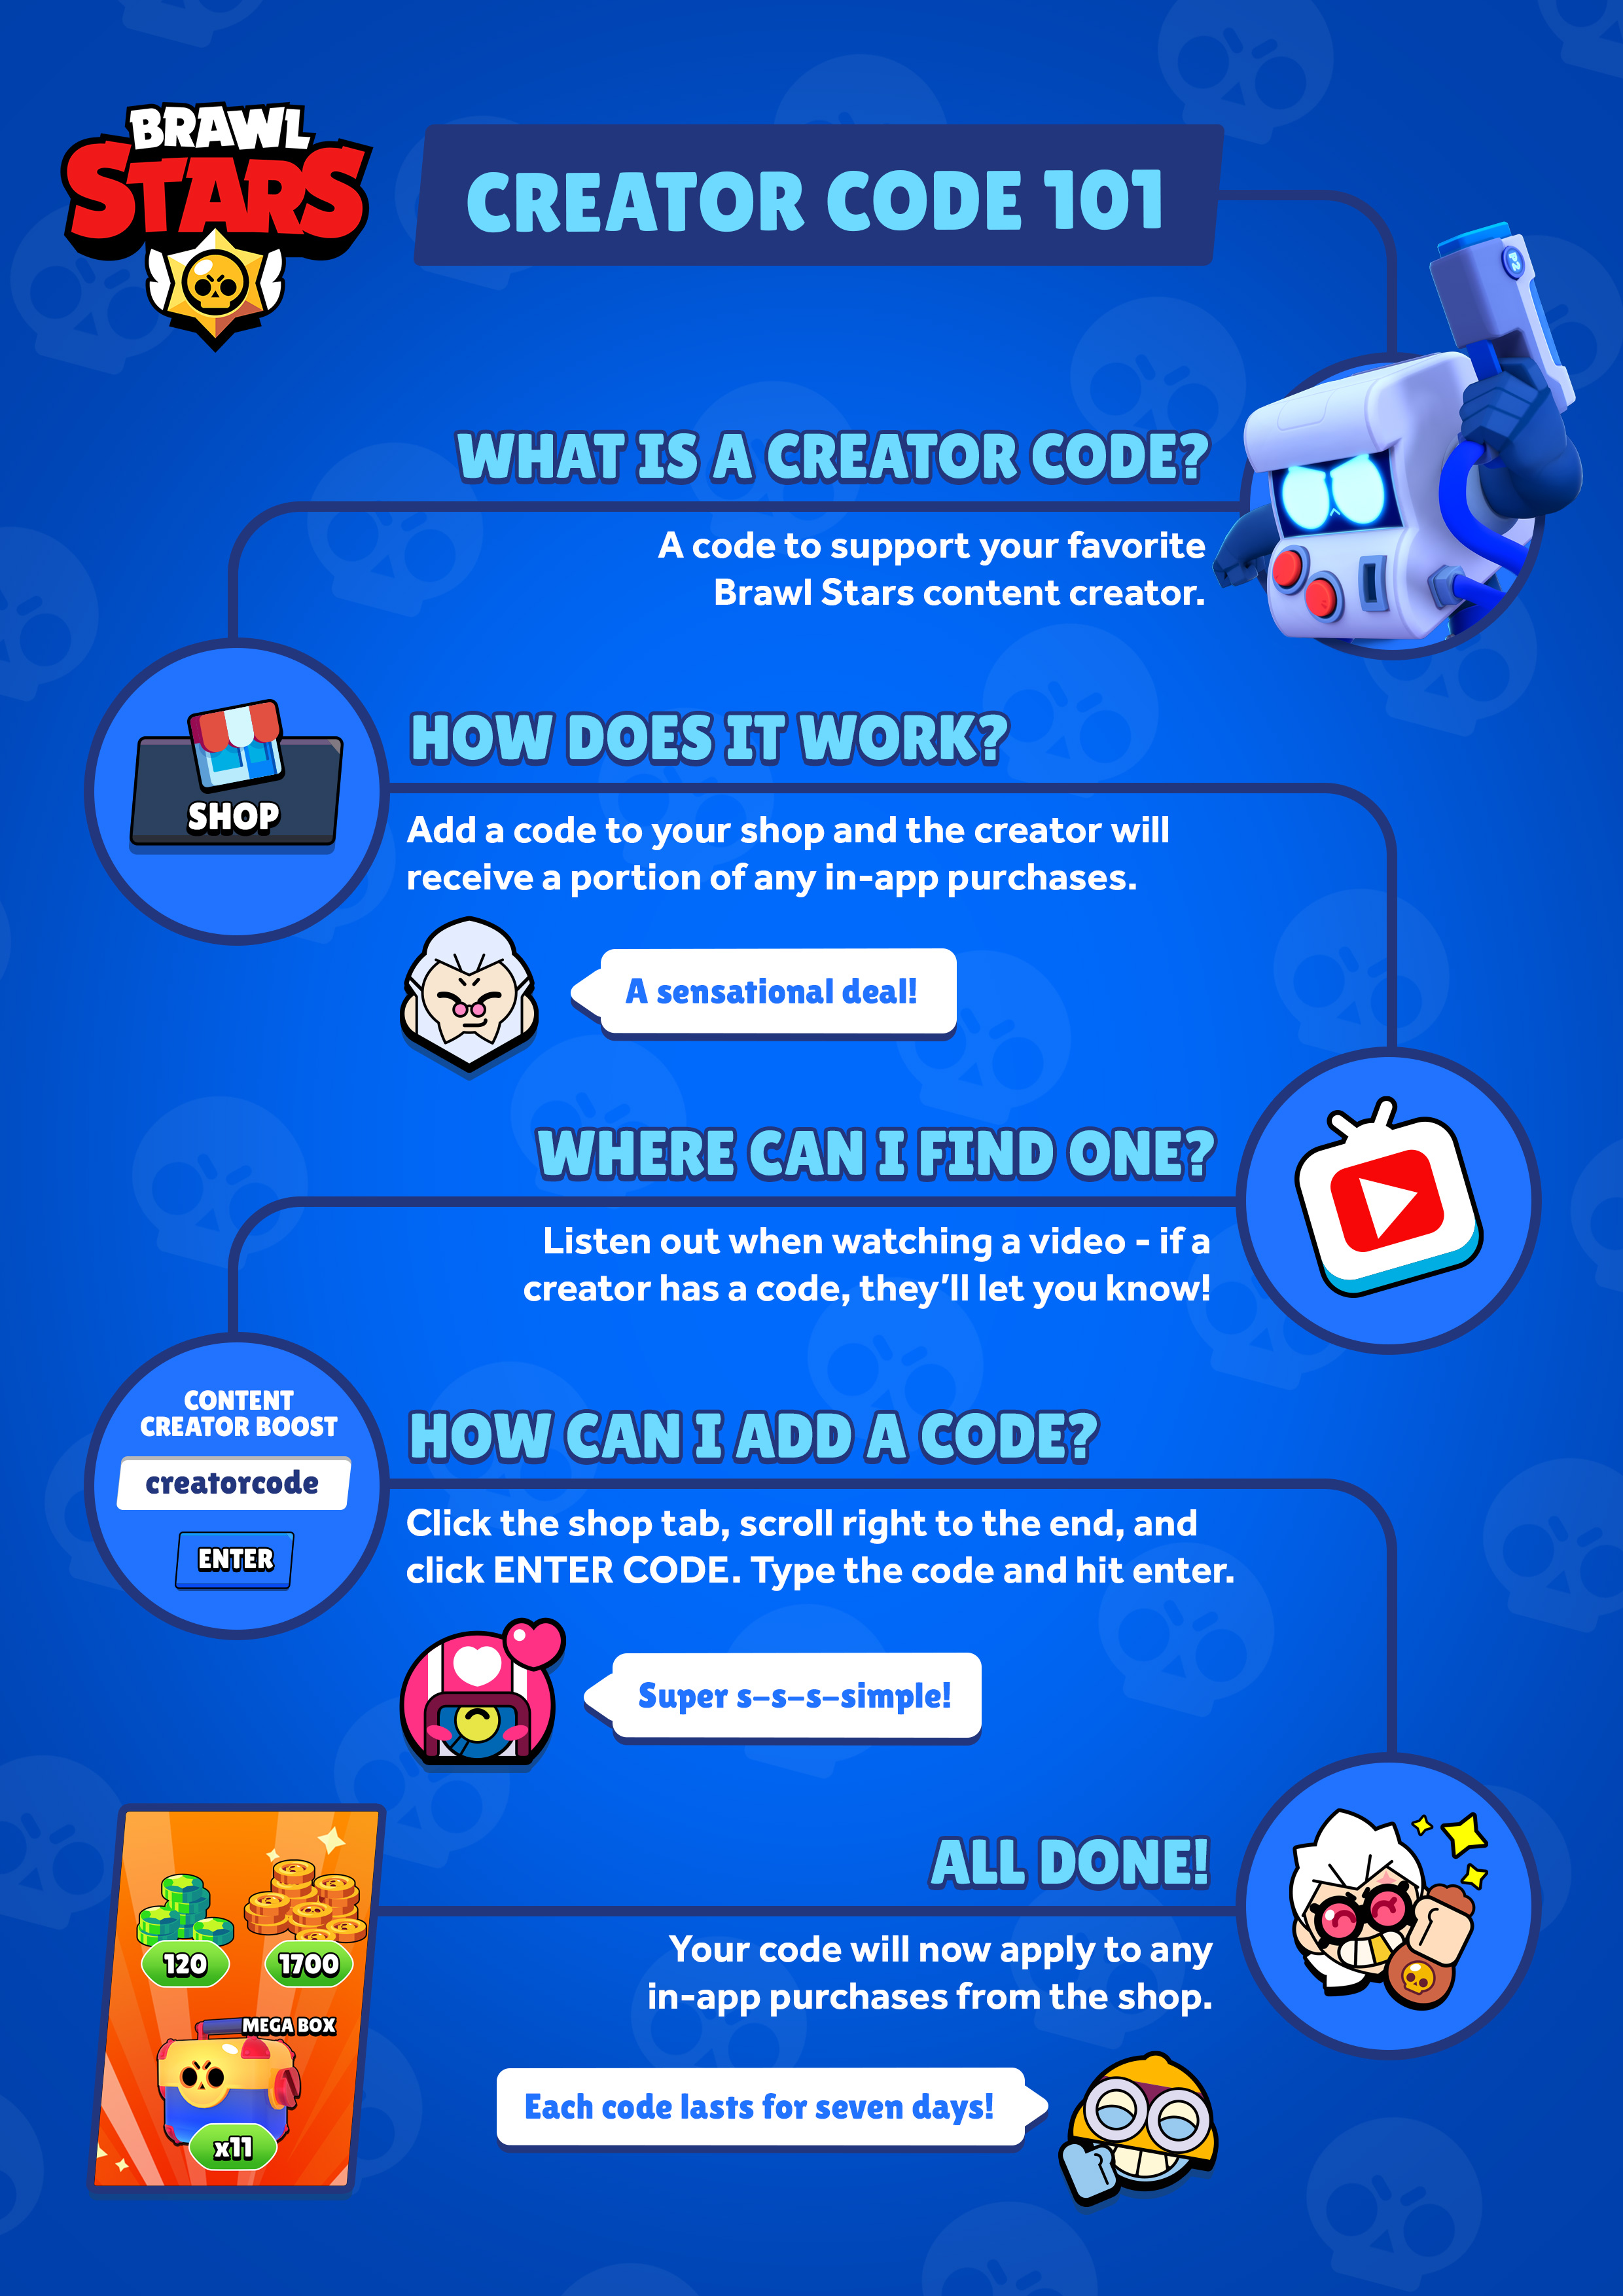 Brawl Stars On Twitter Creator Code Faq Use Creator Codes In The Shop Now All In App Purchases Will Help Support Your Favorite Content Creator Https T Co Yszb7uinnh Twitter - content creator boost brawl stars code 2021